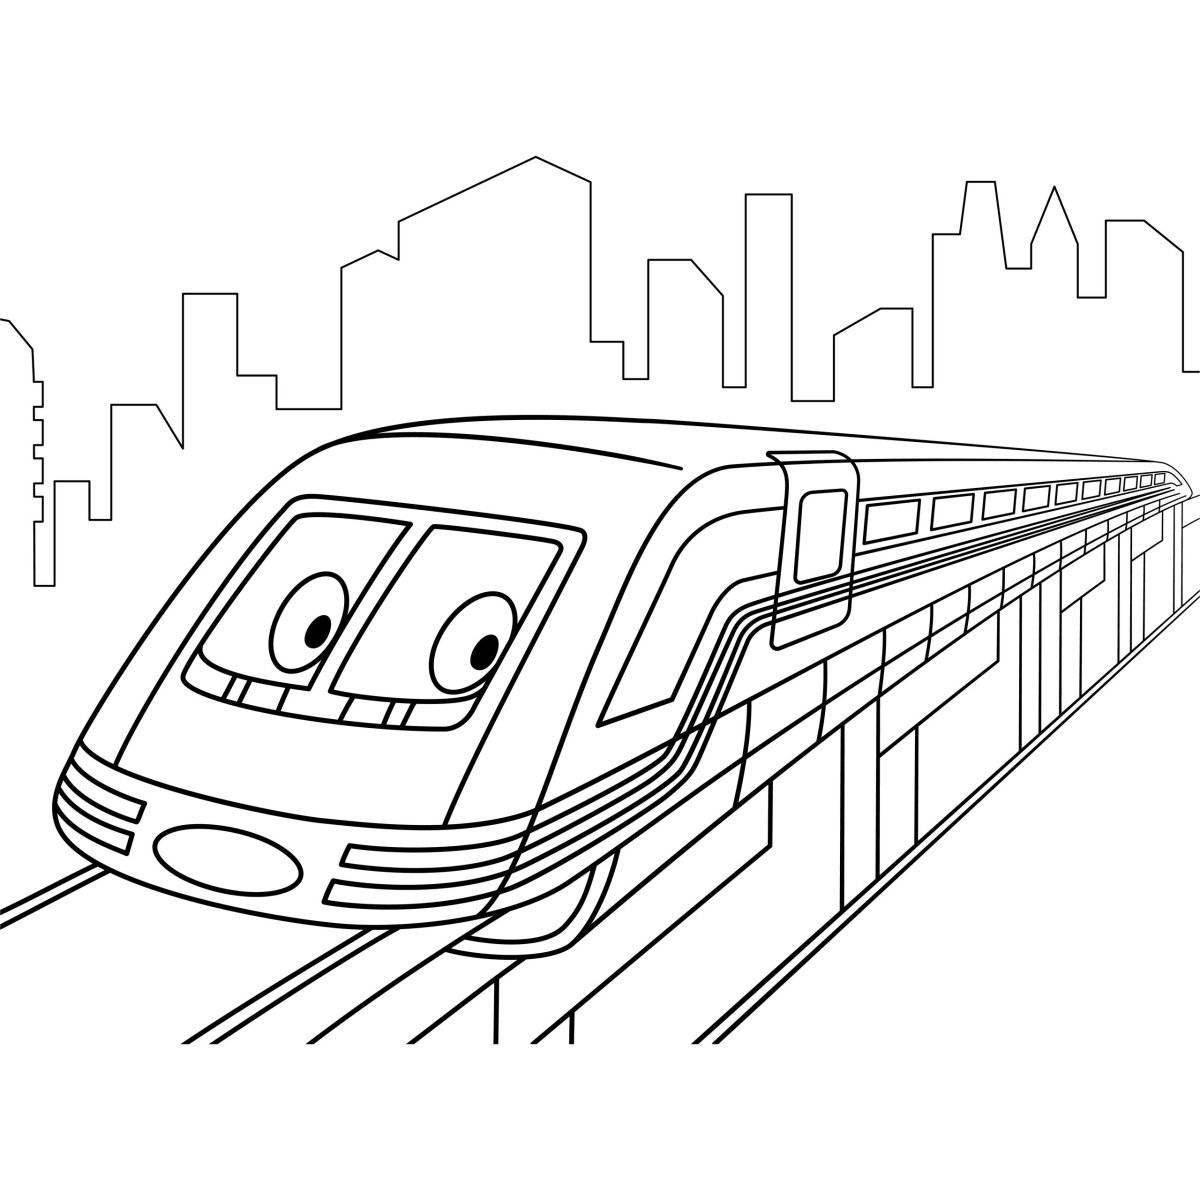 Coloring page bright train of the Moscow metro